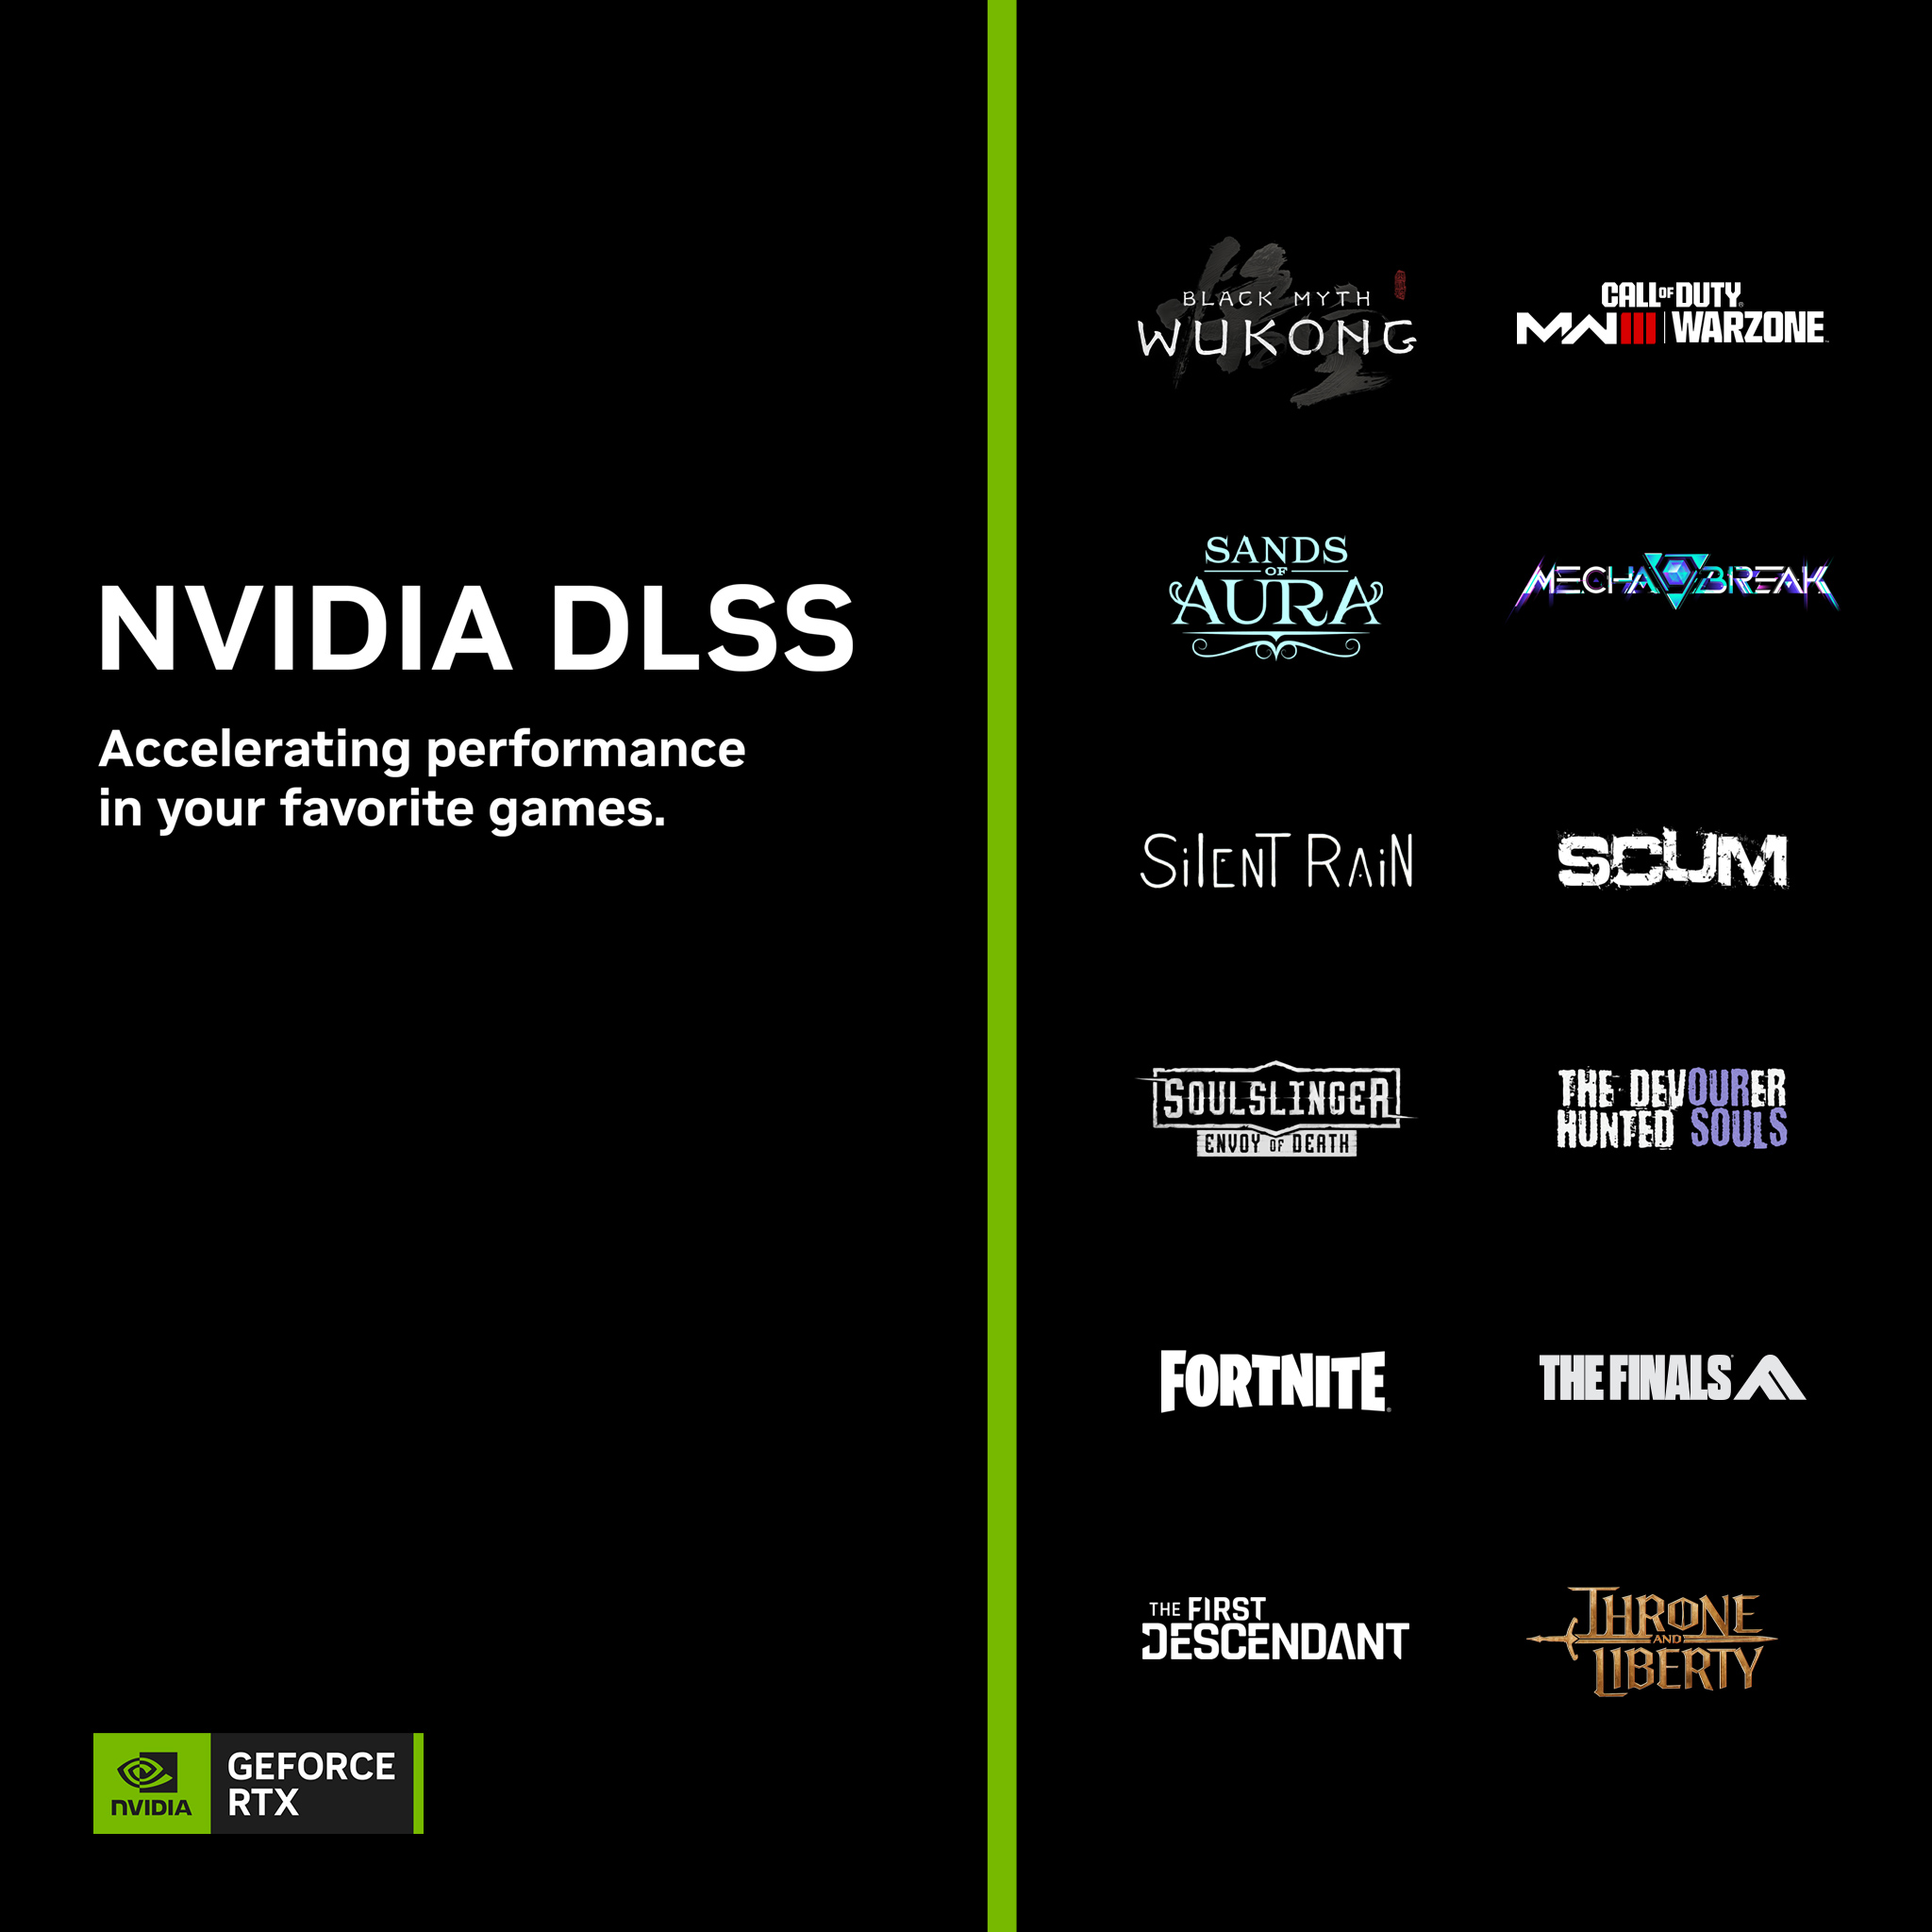 GeForce RTX-Bethesda Softworks Bundle Available Now, Includes Ghostwire:  Tokyo, DOOM Eternal, and the DOOM Eternal Year One Pass, GeForce News